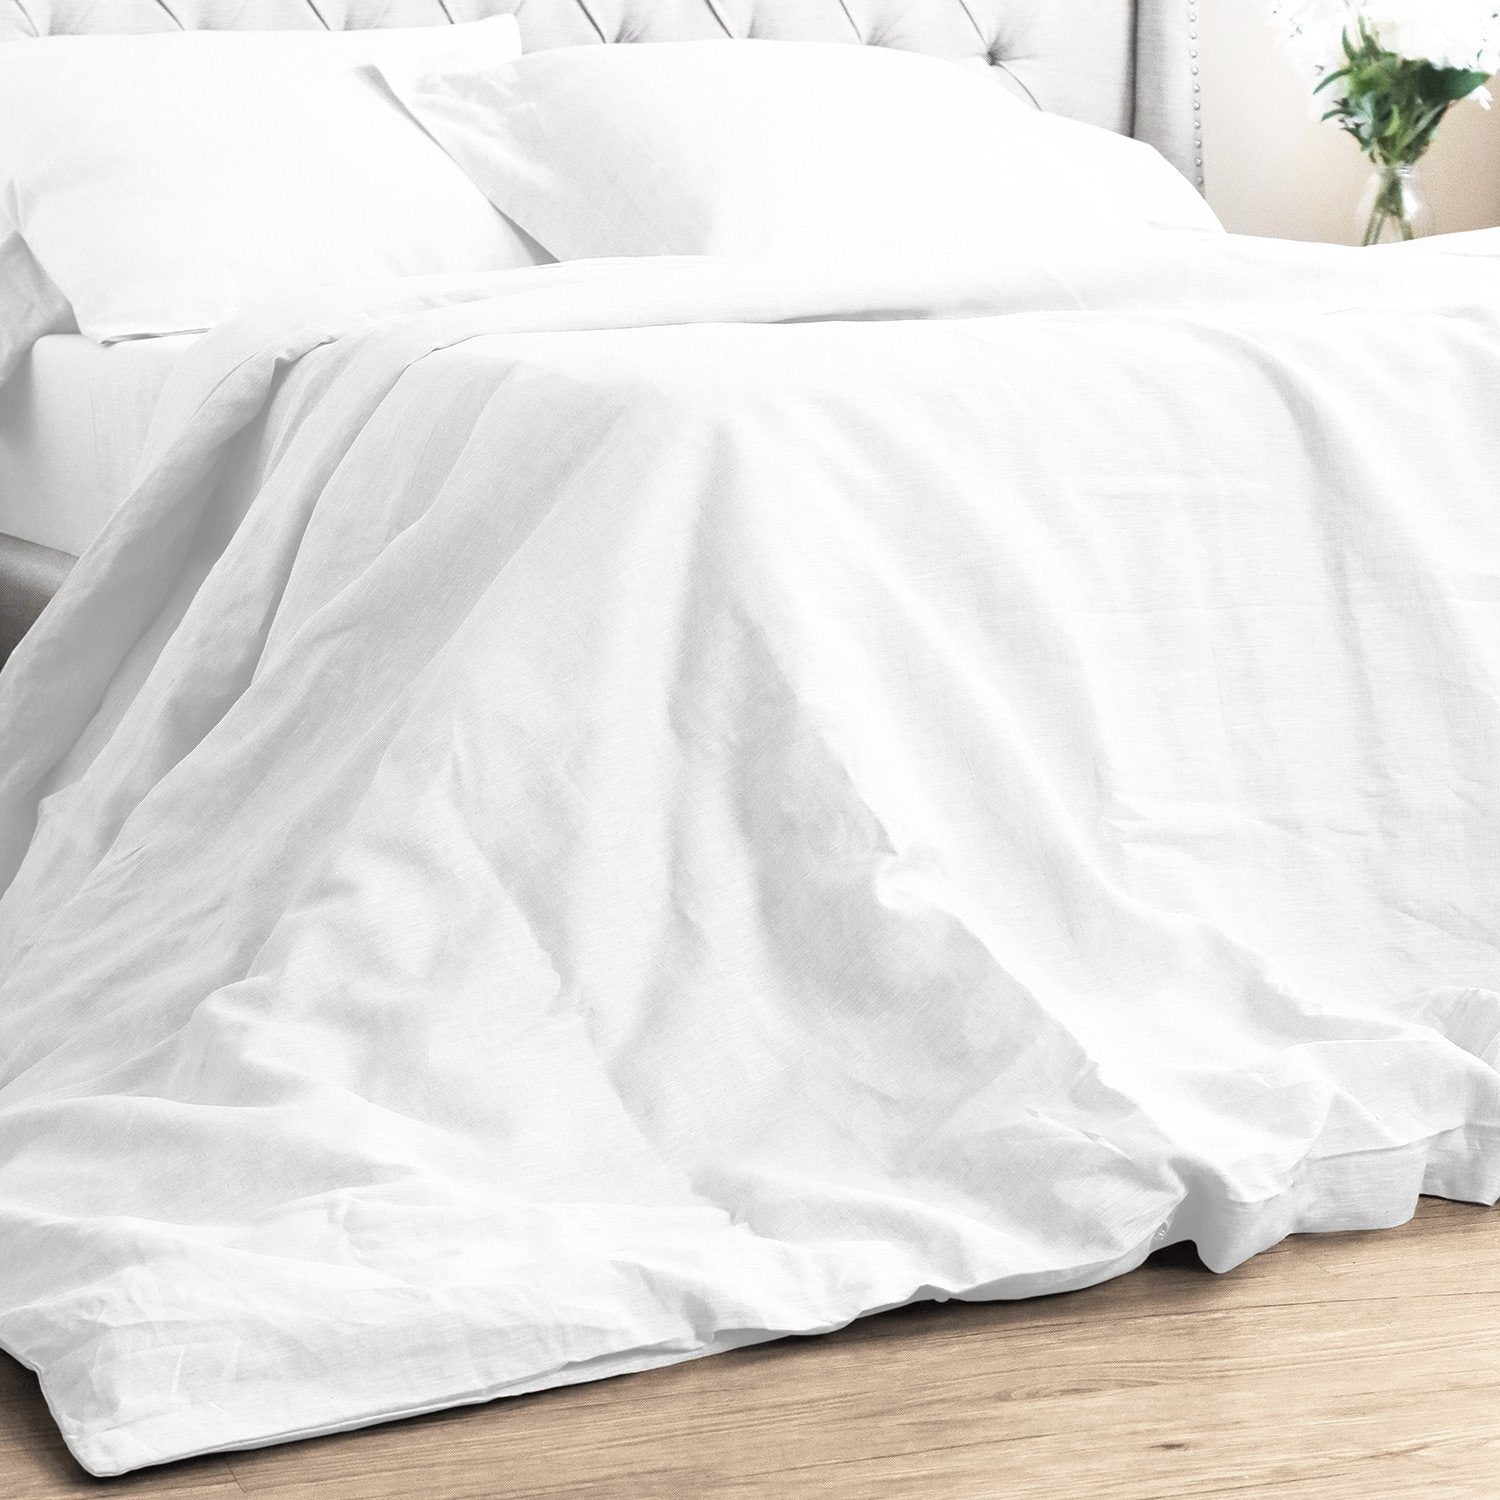 How To Care for Luxury Bedding